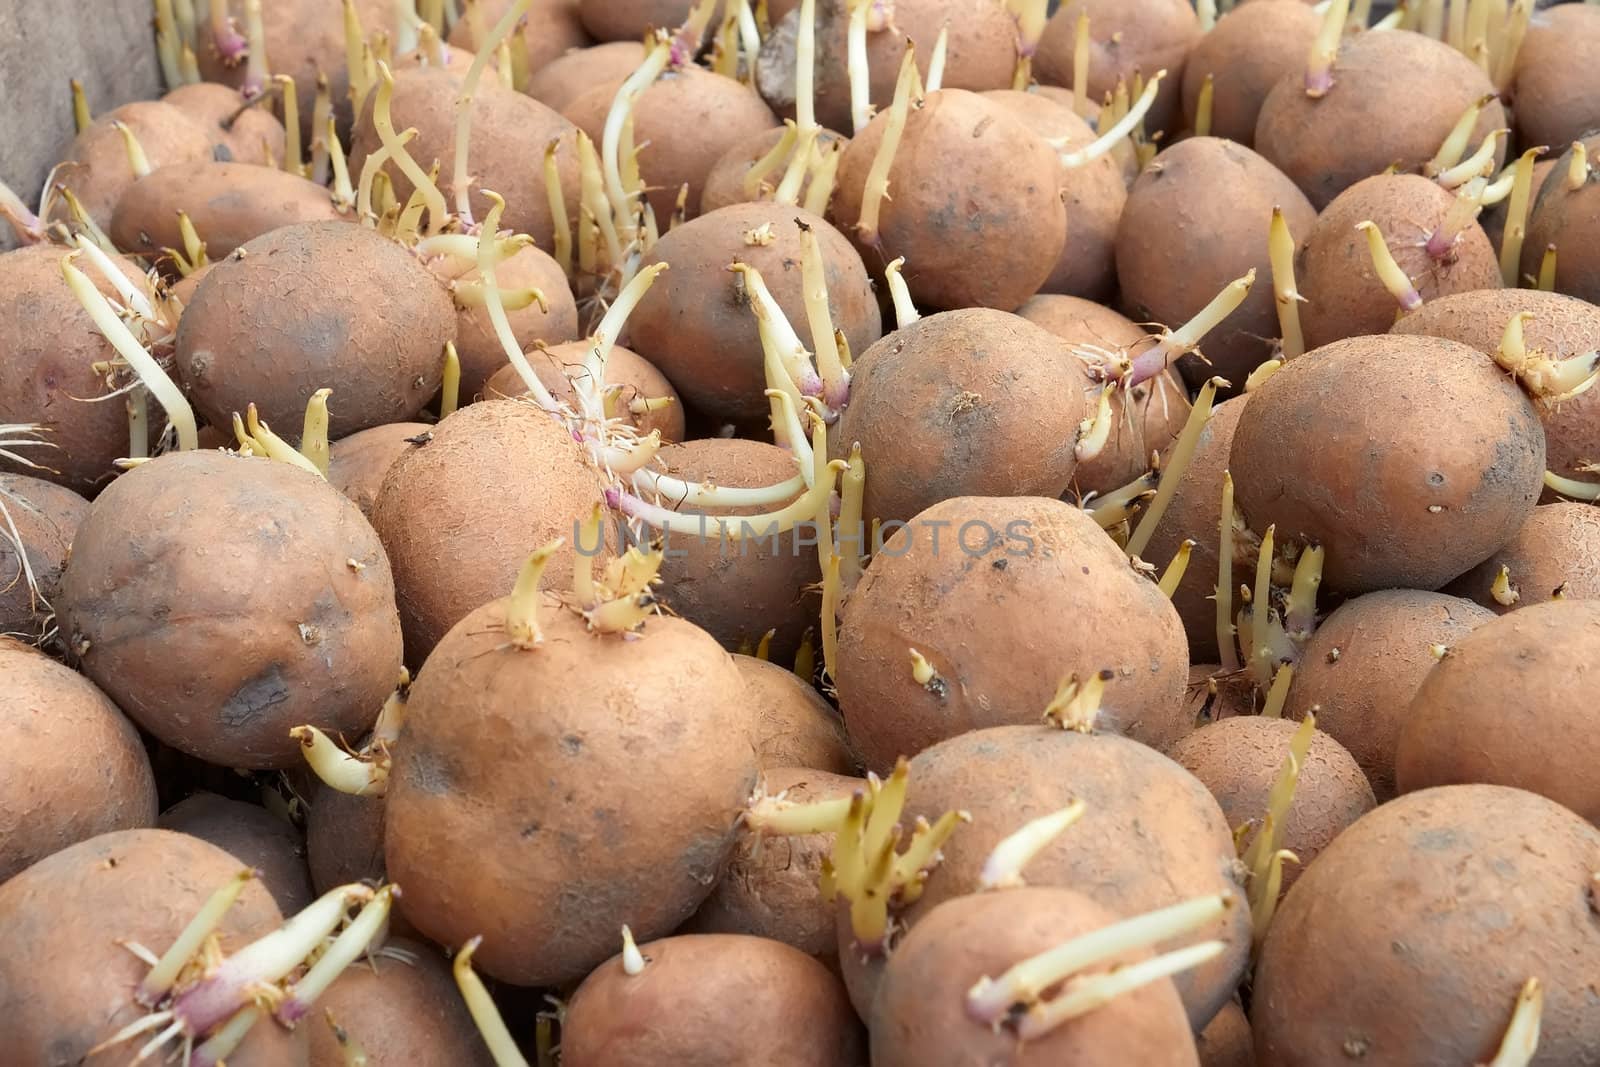 Potatoes tubers with germinated sprouts before planting into the soil in springtime